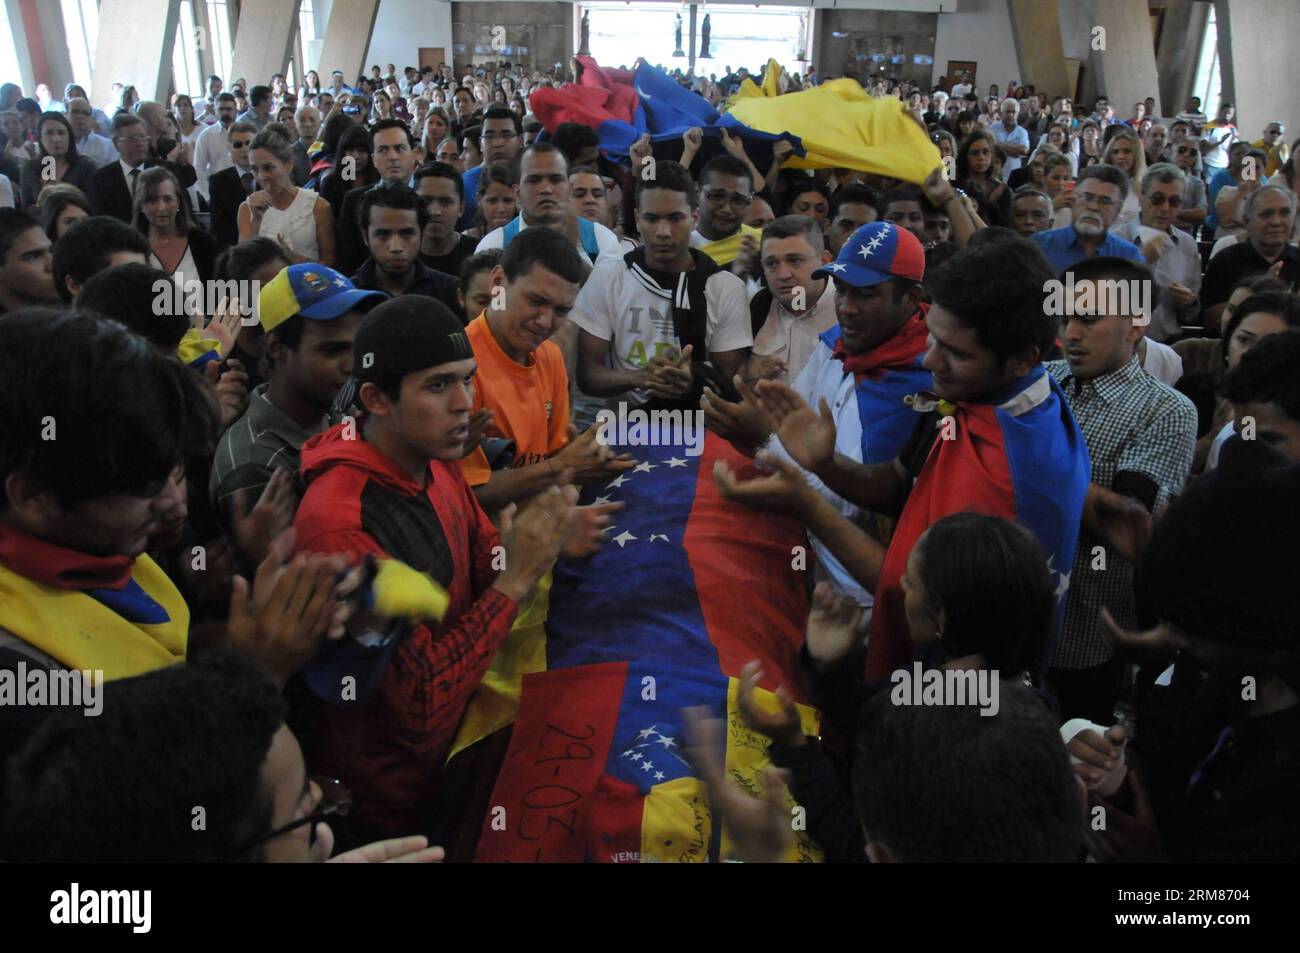 People attend the funeral of Roberto Annese at the Claret Church in the city of Maracaibo, capital of Zulia state, Venezuela, on March 31, 2014. Roberto Annese died on March 29, during the clashes between public officials and opposition demonstrators. (Xinhua/Cristian Hernandez) (jp) (ah) VENEZUELA-MARACAIBO-SOCIETY-FUNERAL PUBLICATIONxNOTxINxCHN   Celebrities attend The Funeral of Roberto  AT The Claret Church in The City of Maracaibo Capital of  State Venezuela ON March 31 2014 Roberto  died ON March 29 during The clashes between Public Officials and Opposition demonstrator XINHUA Cristian H Stock Photo